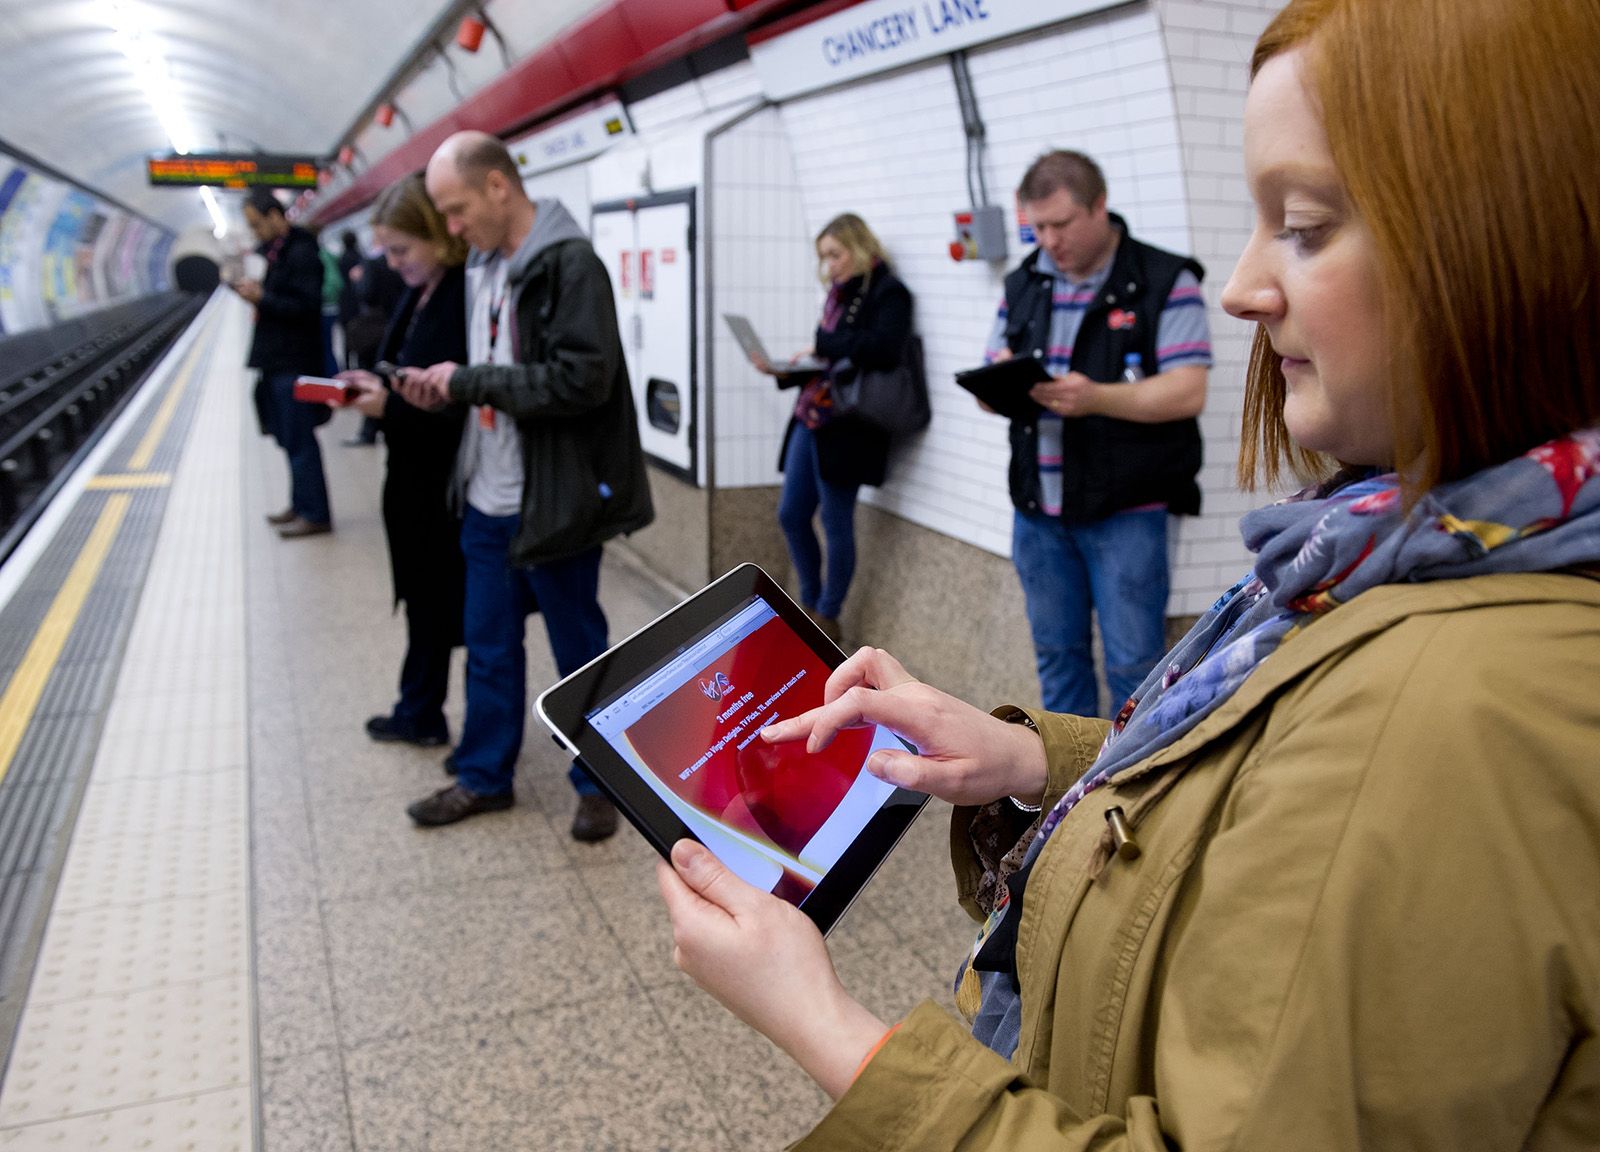 virgin media free wi fi now available in 150 london tube stations including richmond and wimbledon image 1